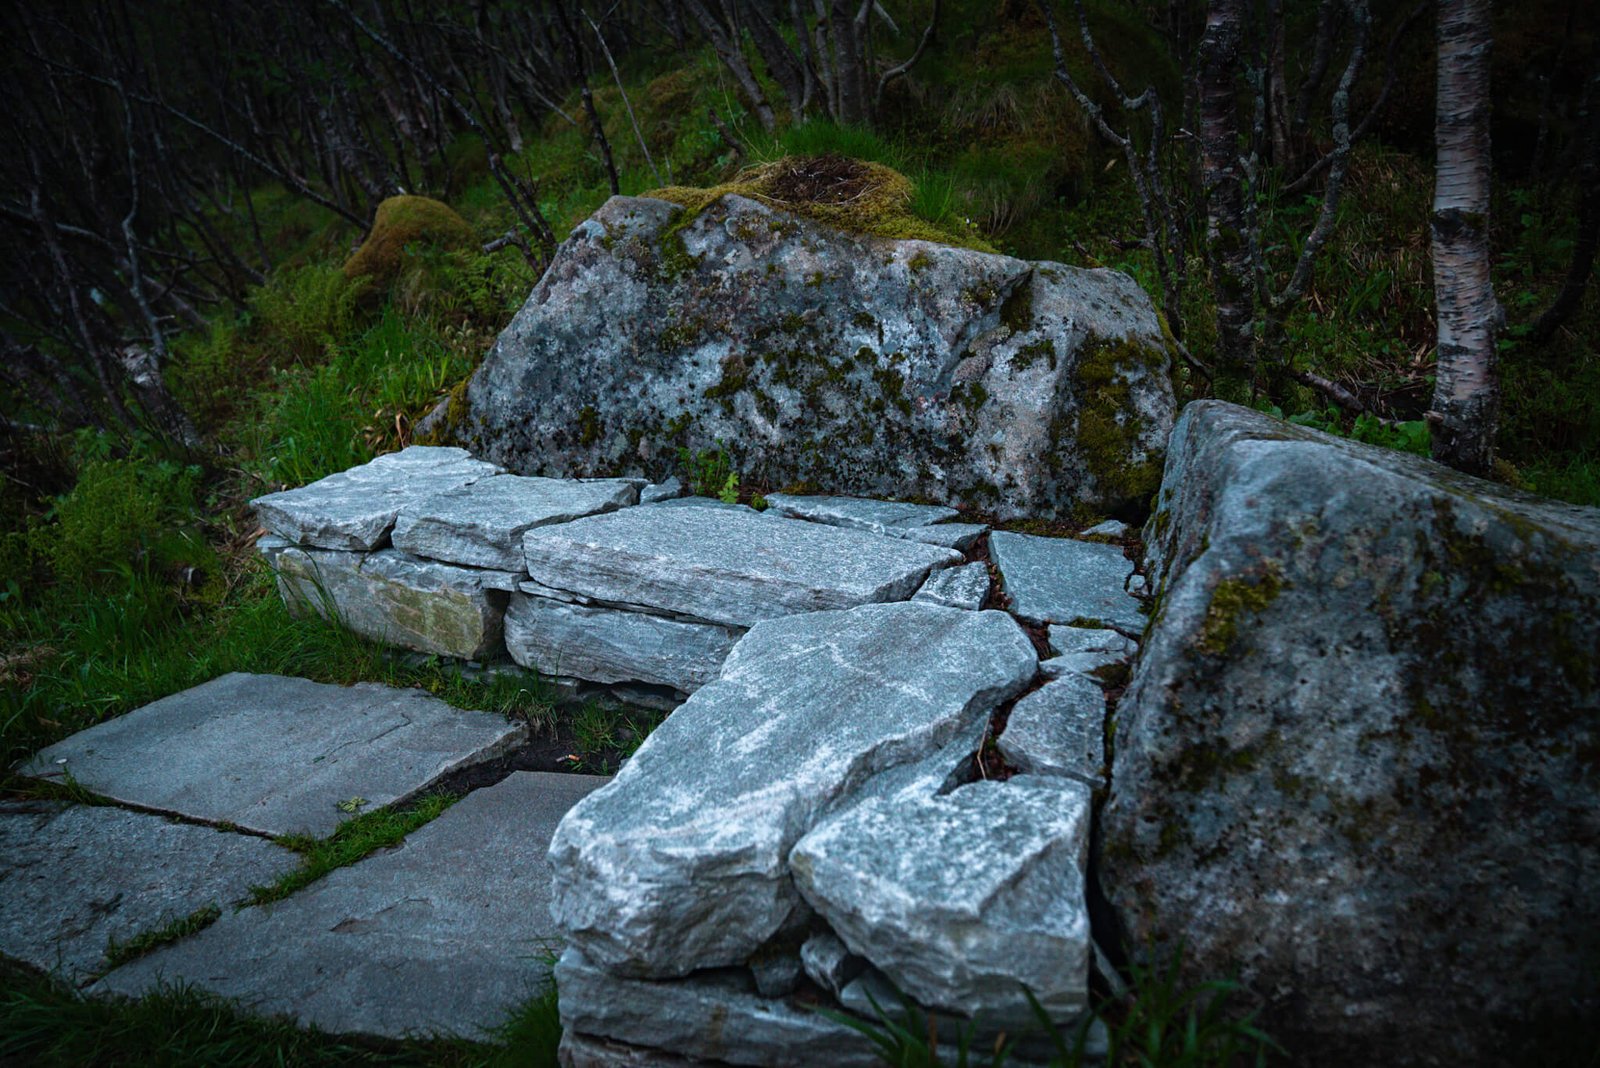 benches at the Reinebringen hike